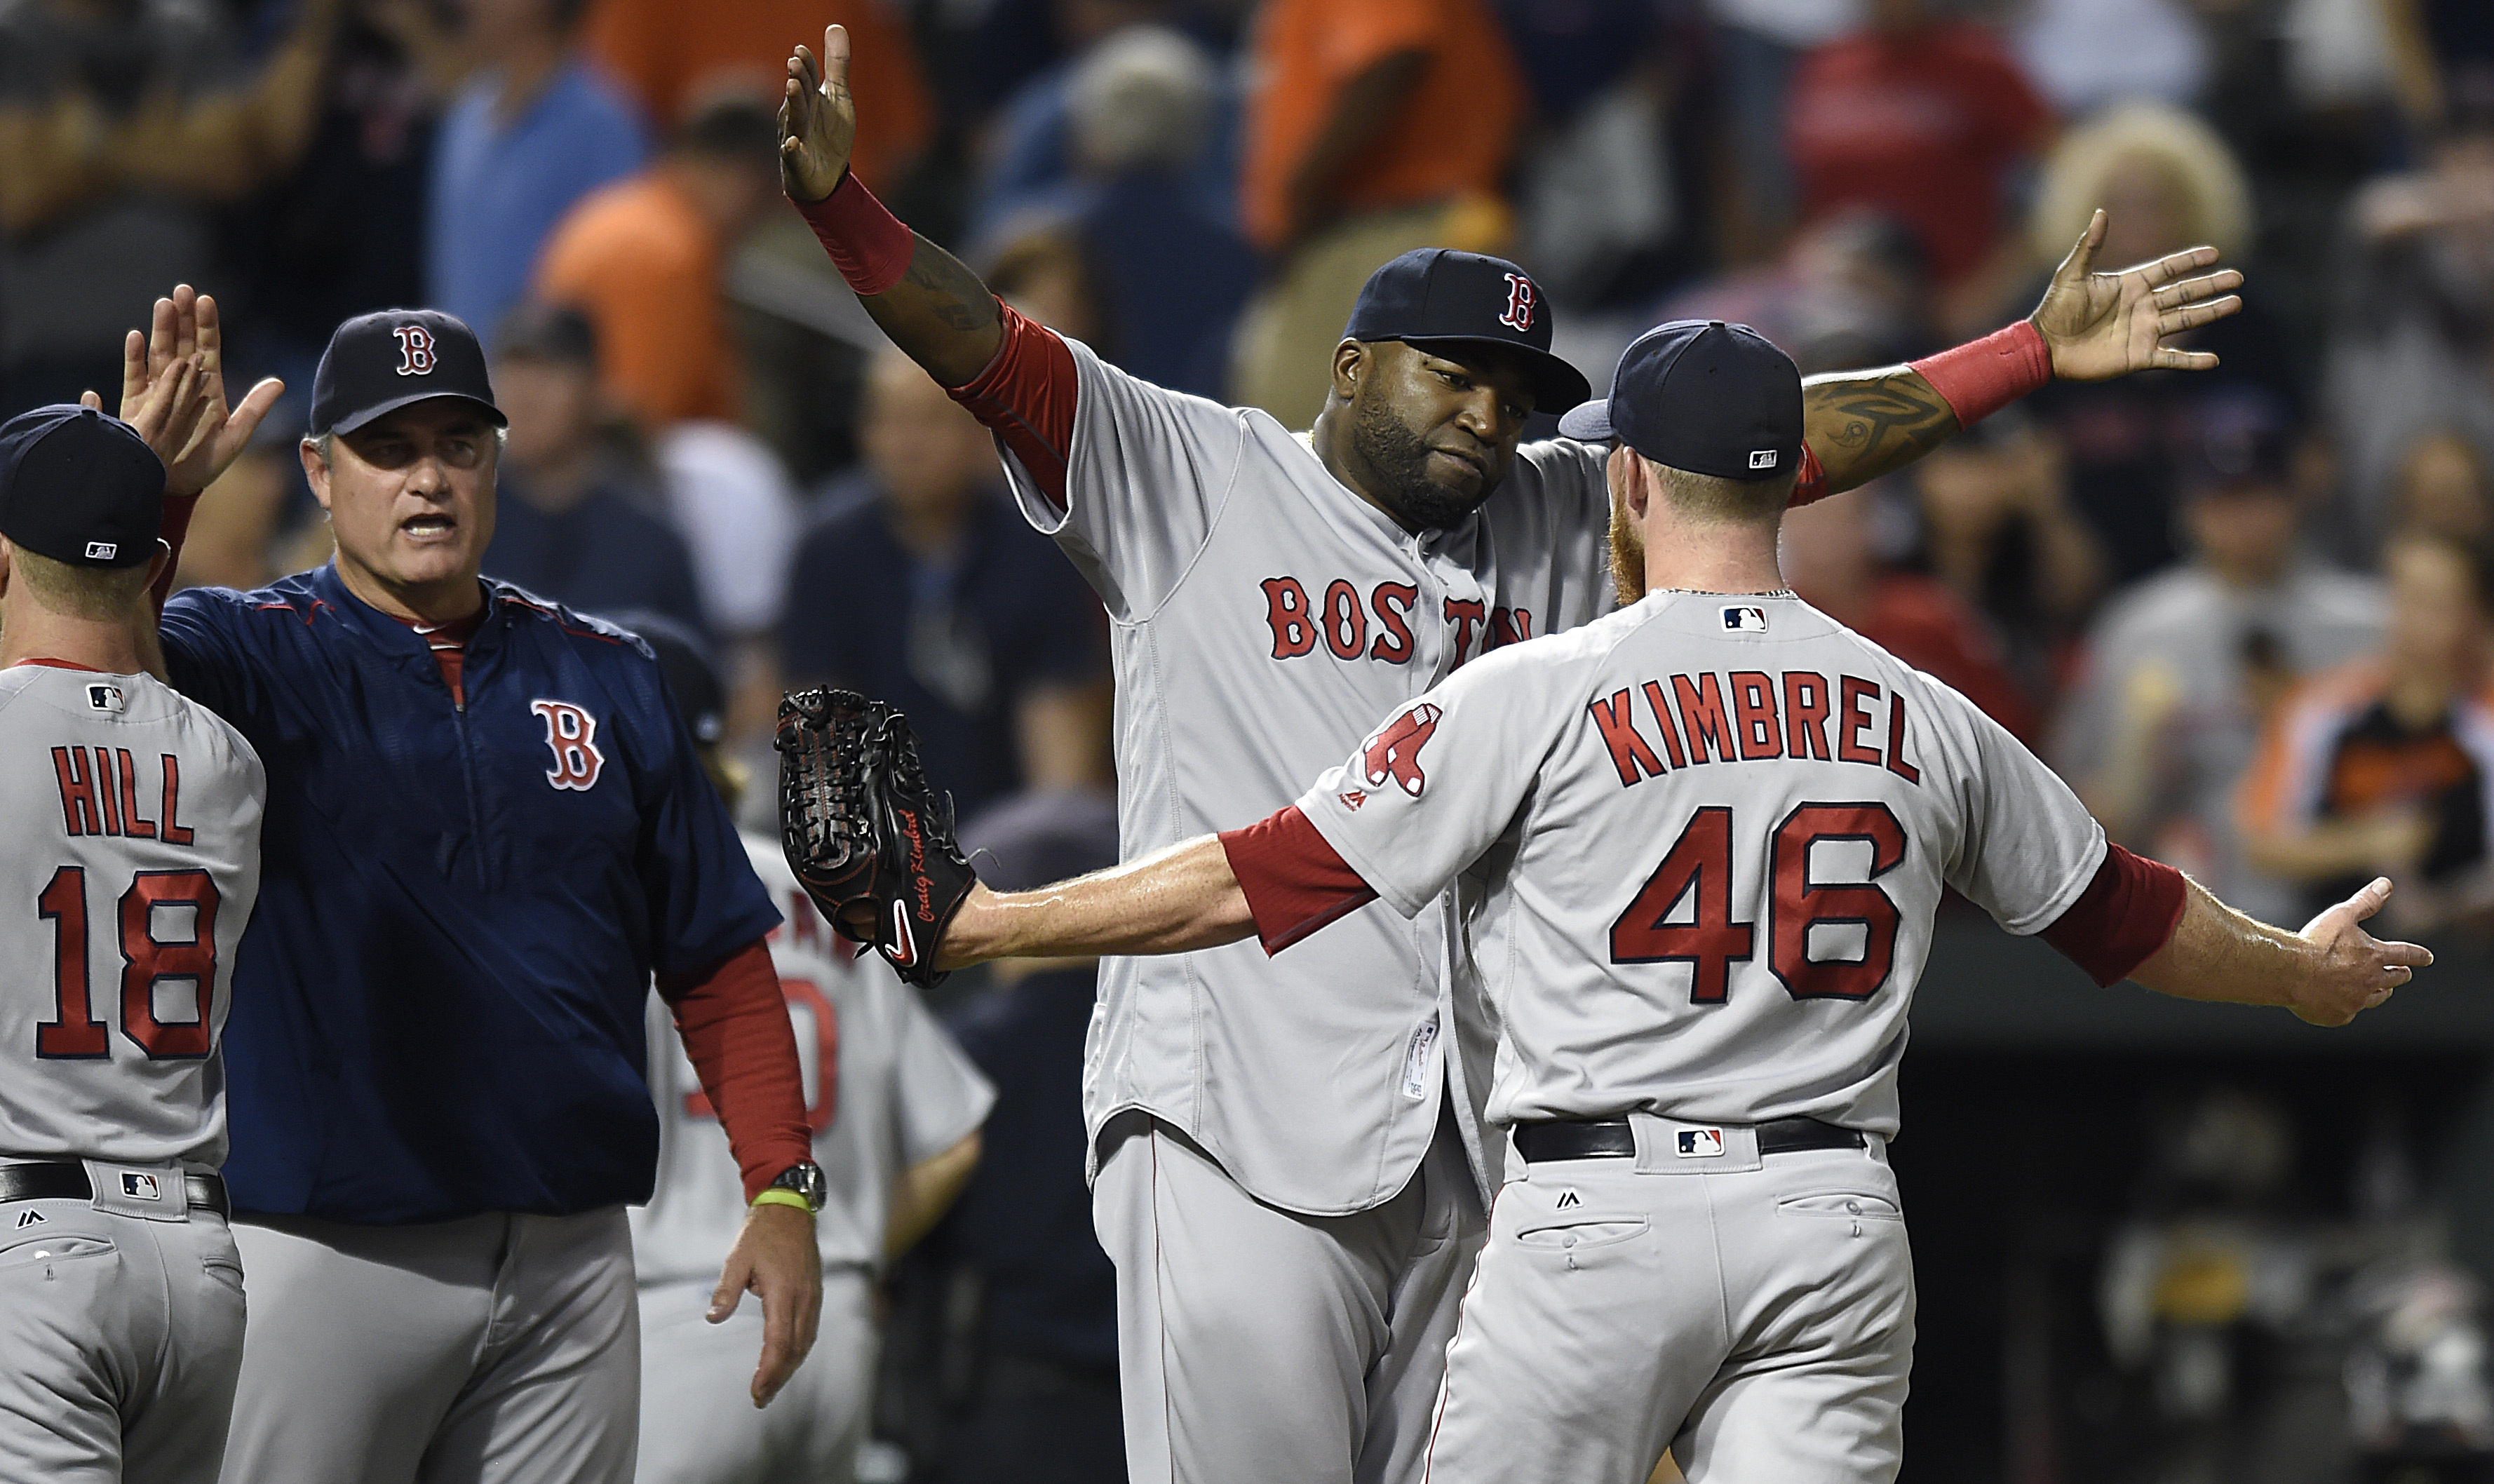 Boston Red Sox designated hitter David Ortiz, center hugs closing pitcher Craig Kimbrel after defeating the Baltimore Orioles 5-3 in a baseball game to sweep a four game series, Thursday, Sept.. 22, 2016, in Baltimore. (AP Photo/Gail Burton)